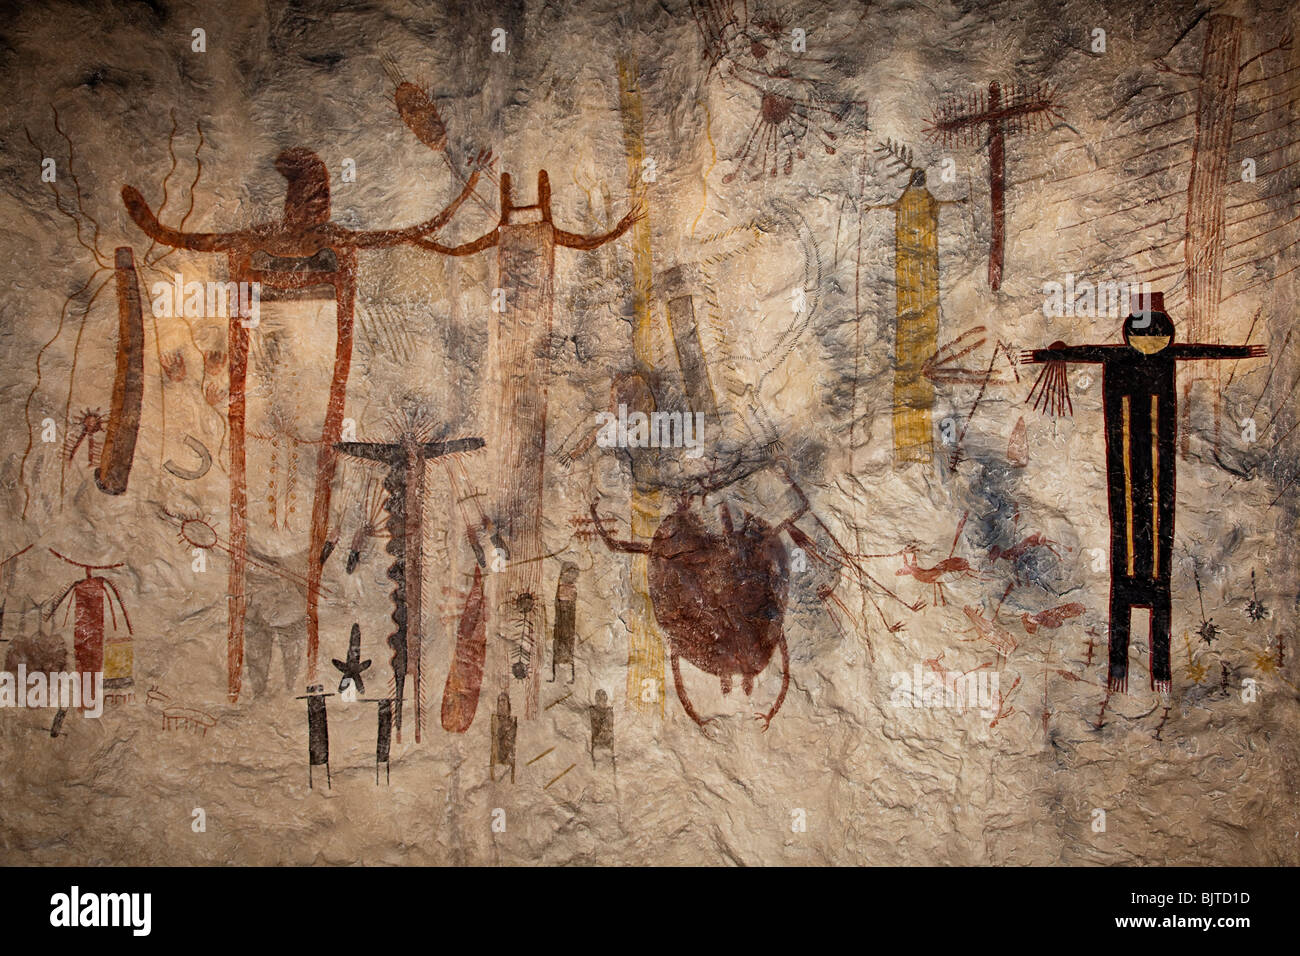 Museum exhibit showing Native American rock art pictographs from Seminole Canyon Texas USA Stock Photo